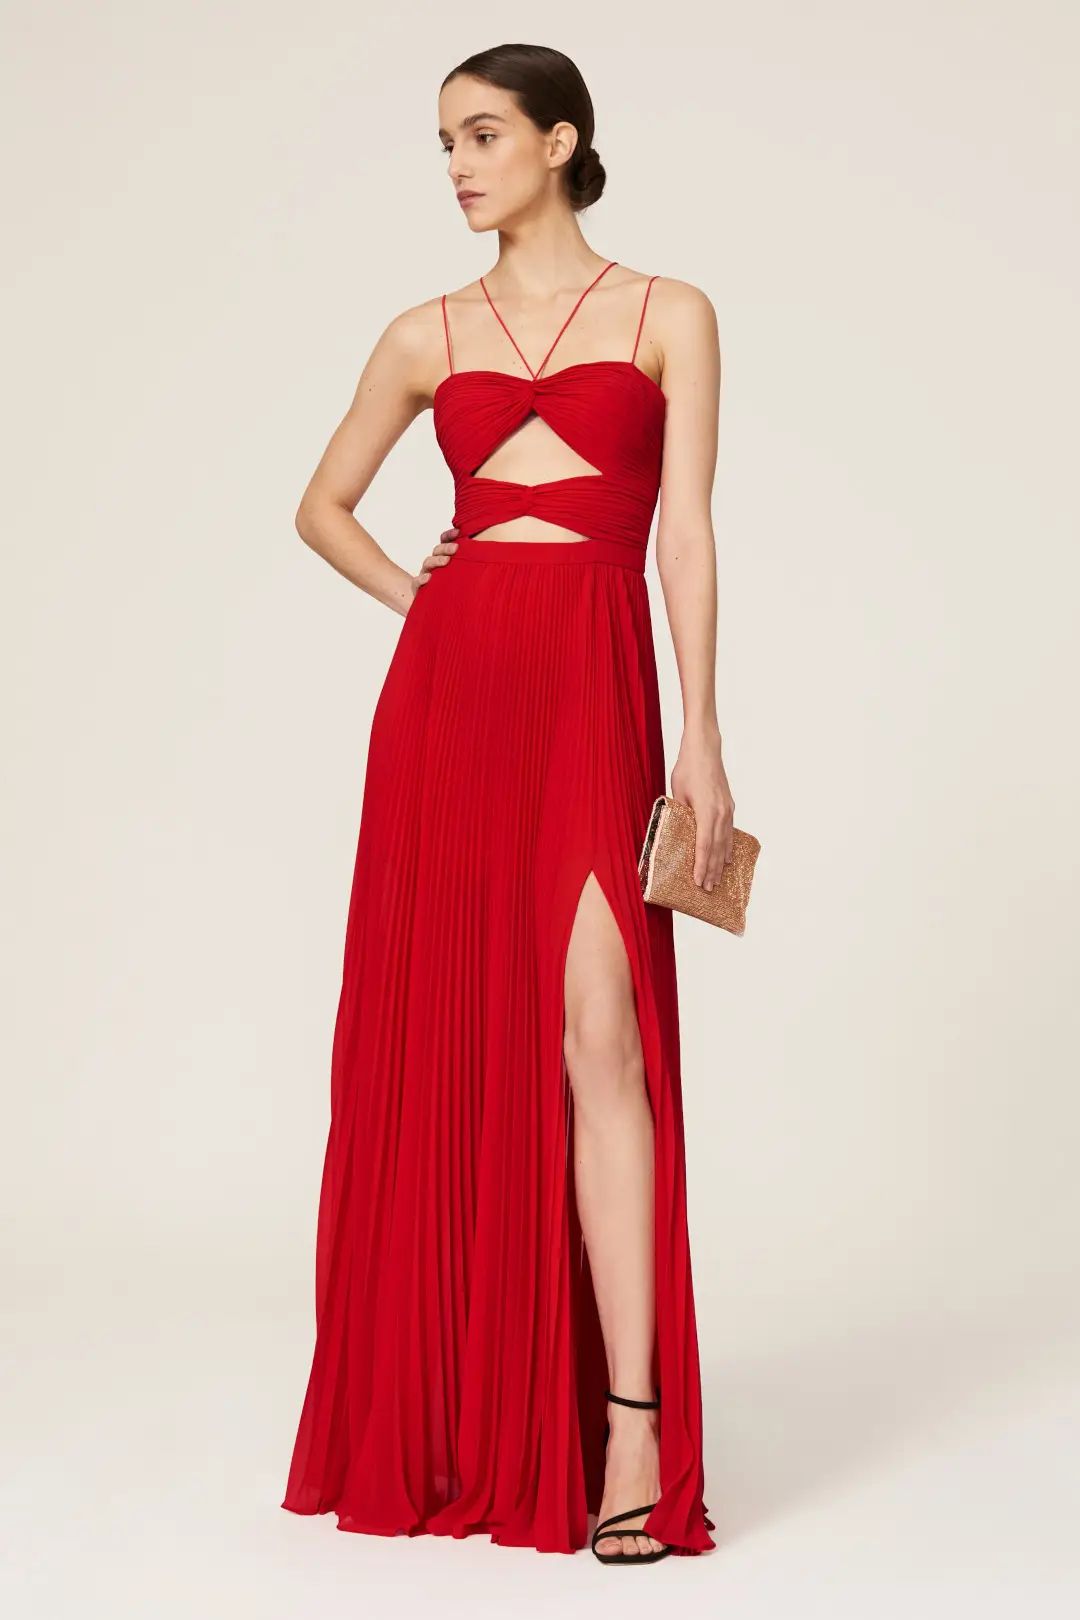 Lana Cutout Gown | Rent the Runway